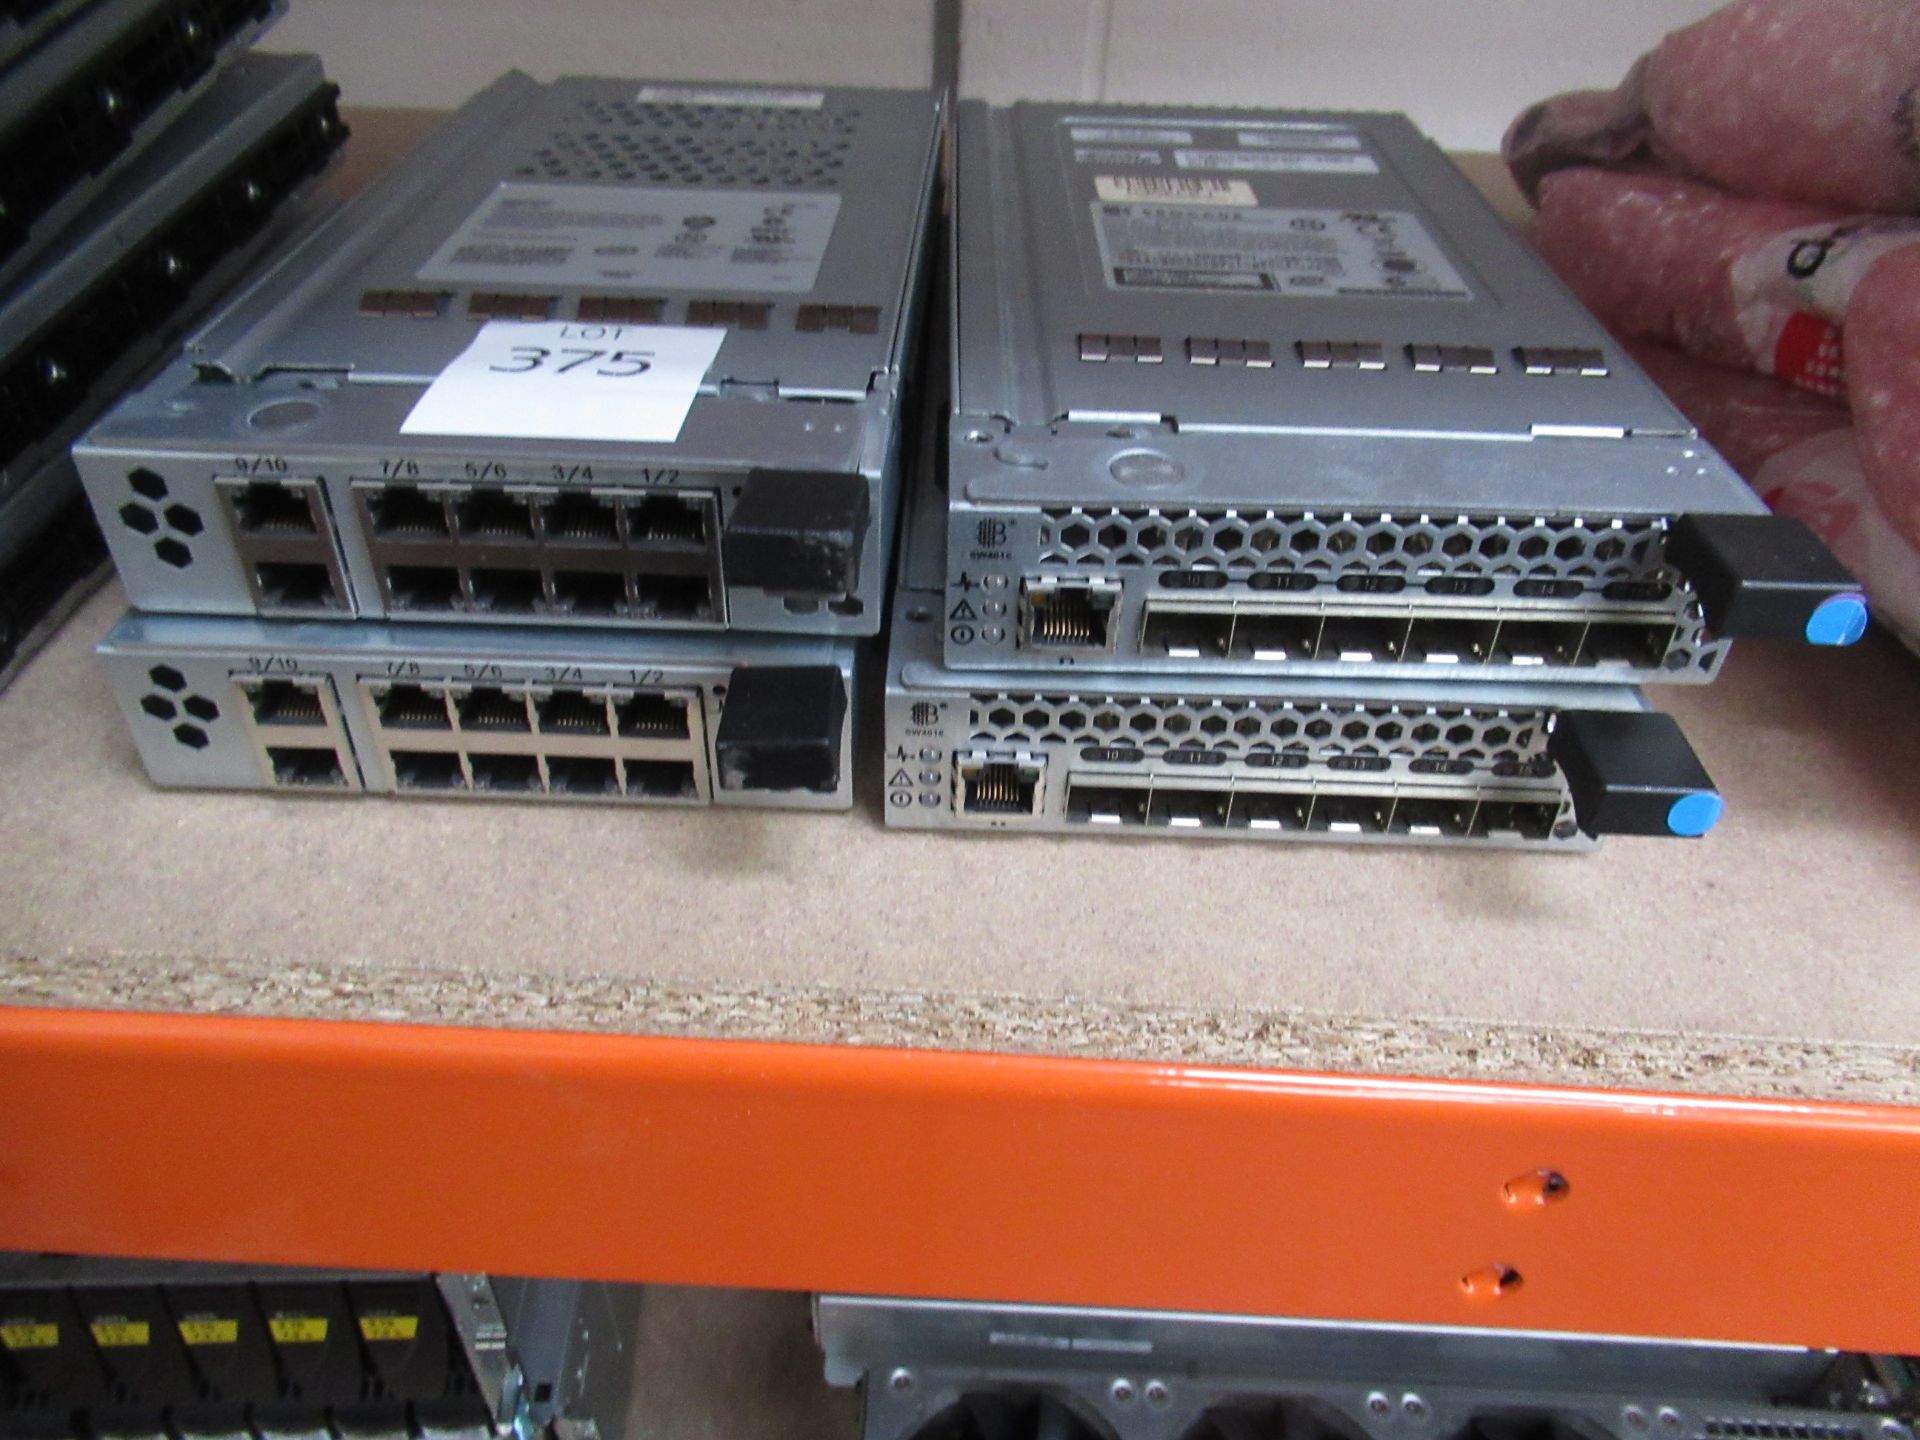 1 x AMS old style controller 4g DIMM, 8G Fibre channel interface, Control unit, 1 x AMS 2300 Control - Image 21 of 32